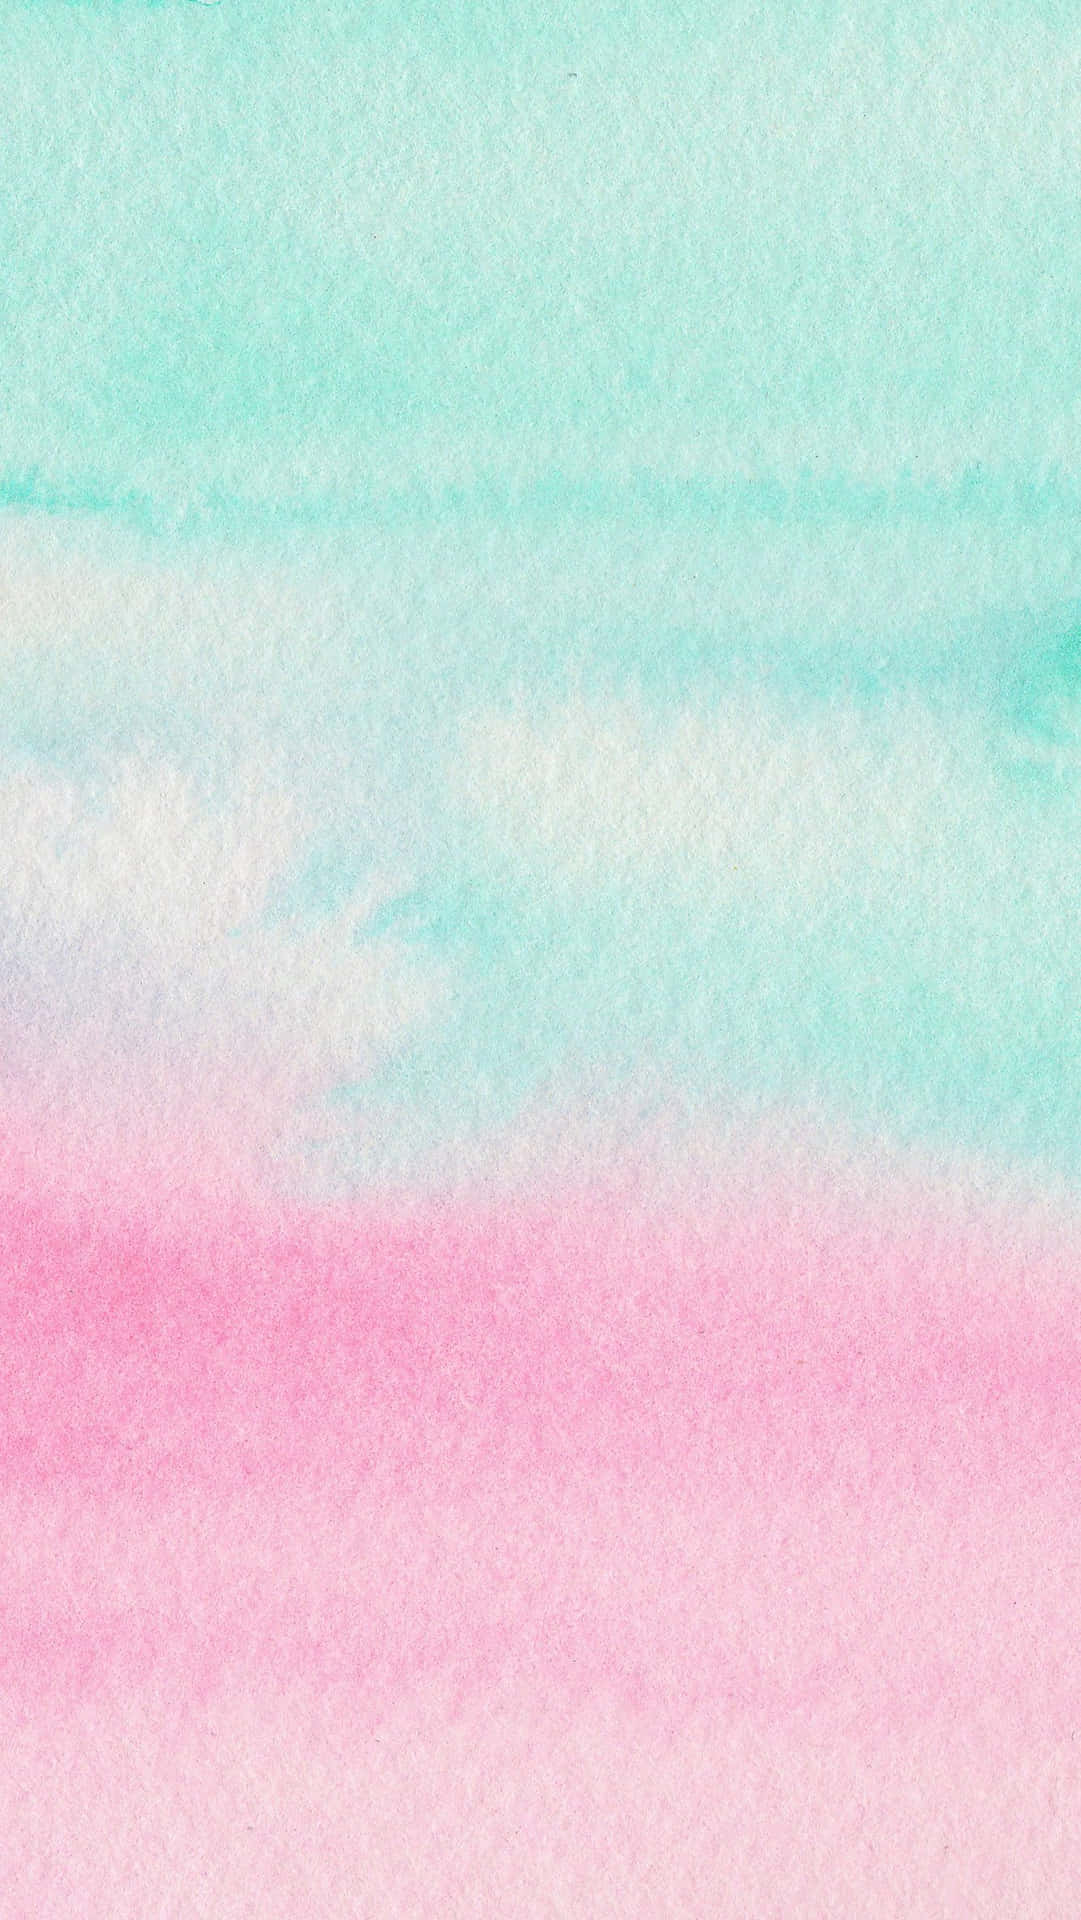 Download A beautiful mix of pink and blue | Wallpapers.com